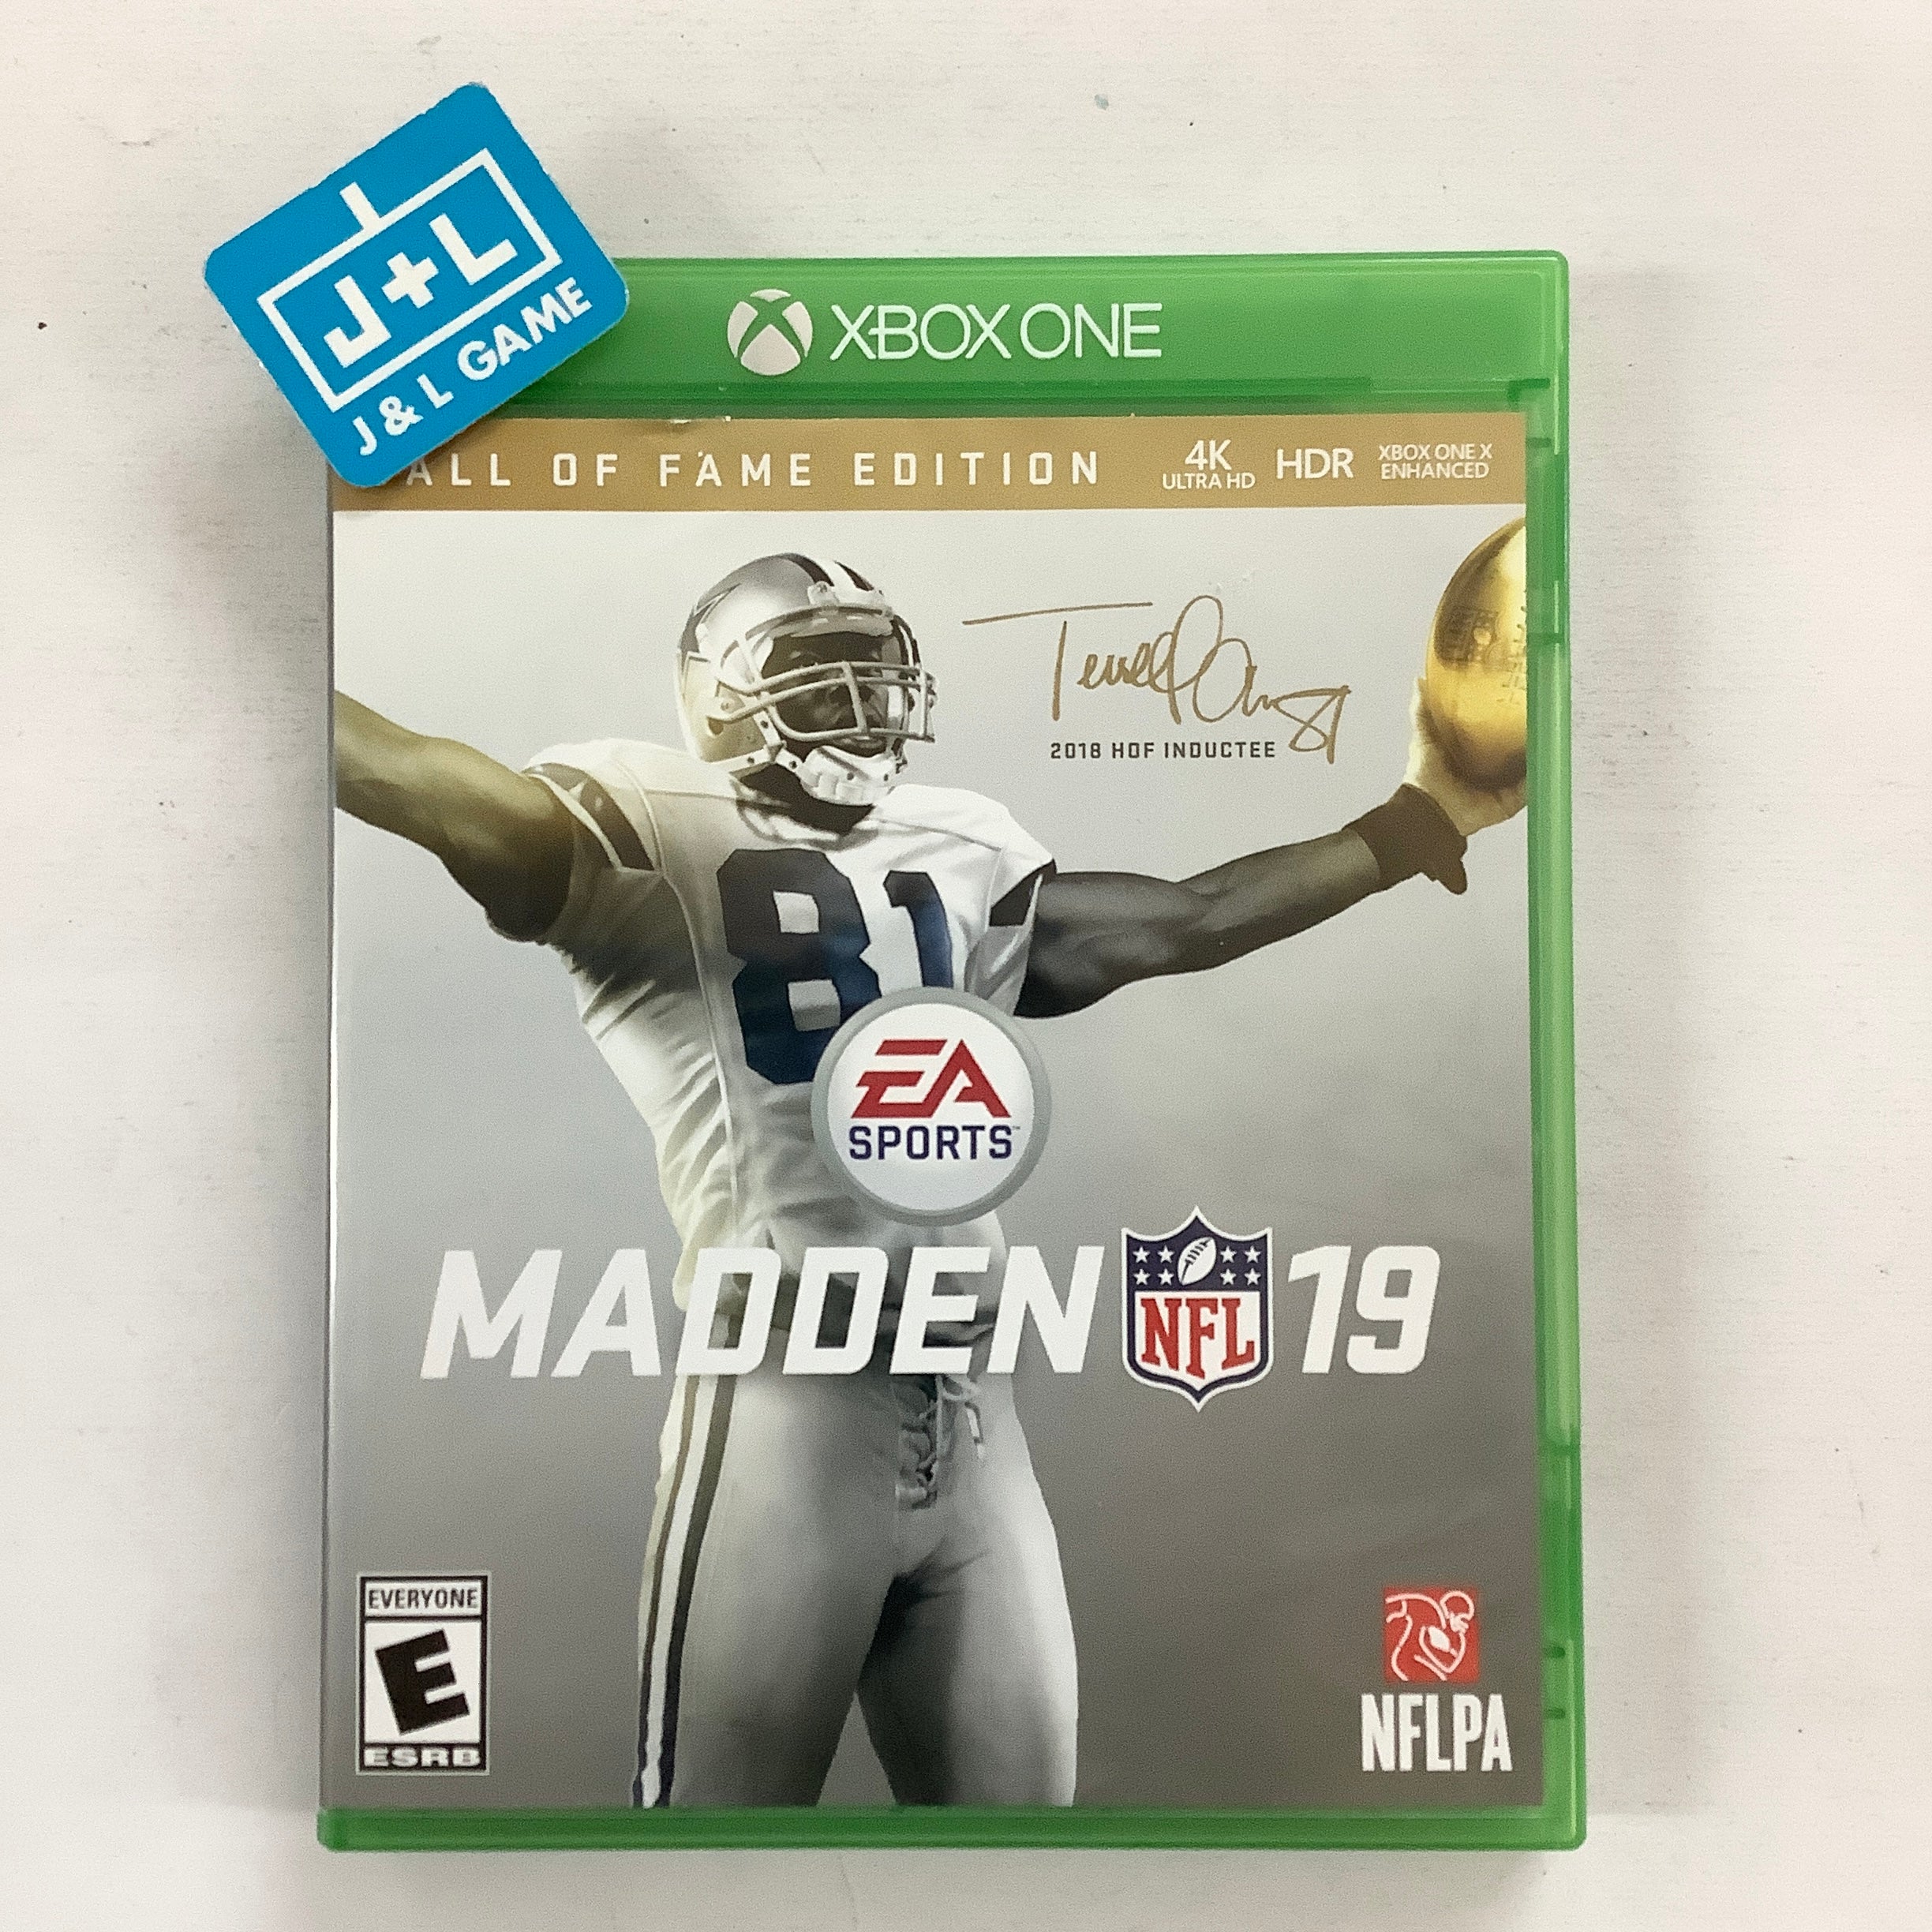 Madden NFL 19 (Hall of Fame Edition) - (XB1) Xbox One [Pre-Owned]